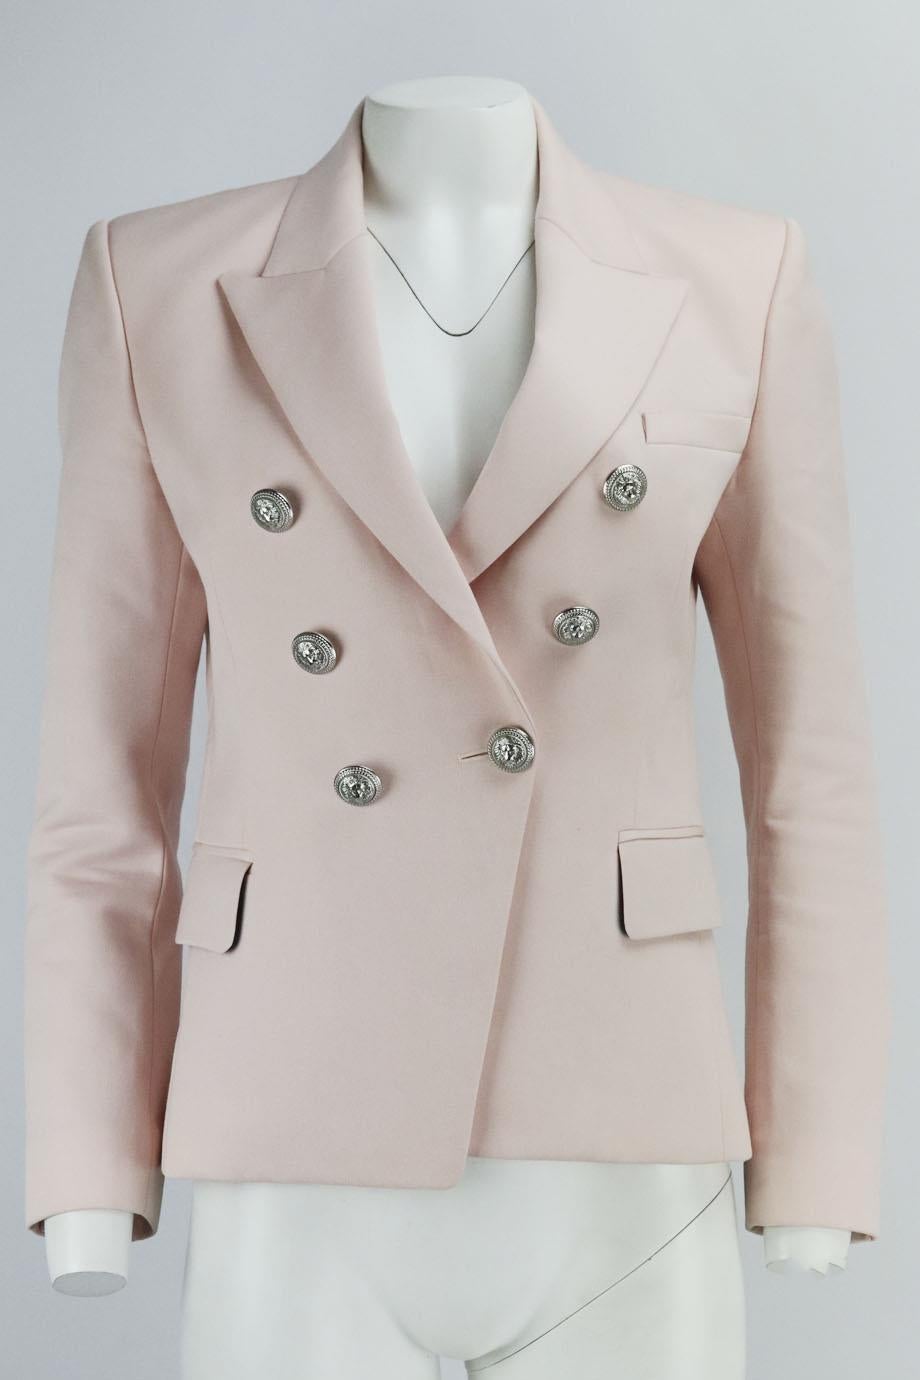 Balmain double breasted wool twill blazer. Pink. Long sleeve, v-neck. Button fastening at front. 100% Wool; lining: 52% viscose, 48% cotton. Size: FR 40 (UK 12, US 8, IT 44). Shoulder to shoulder: 16.5 in. Bust: 38 in. Waist: 35 in. Hips: 42 in.